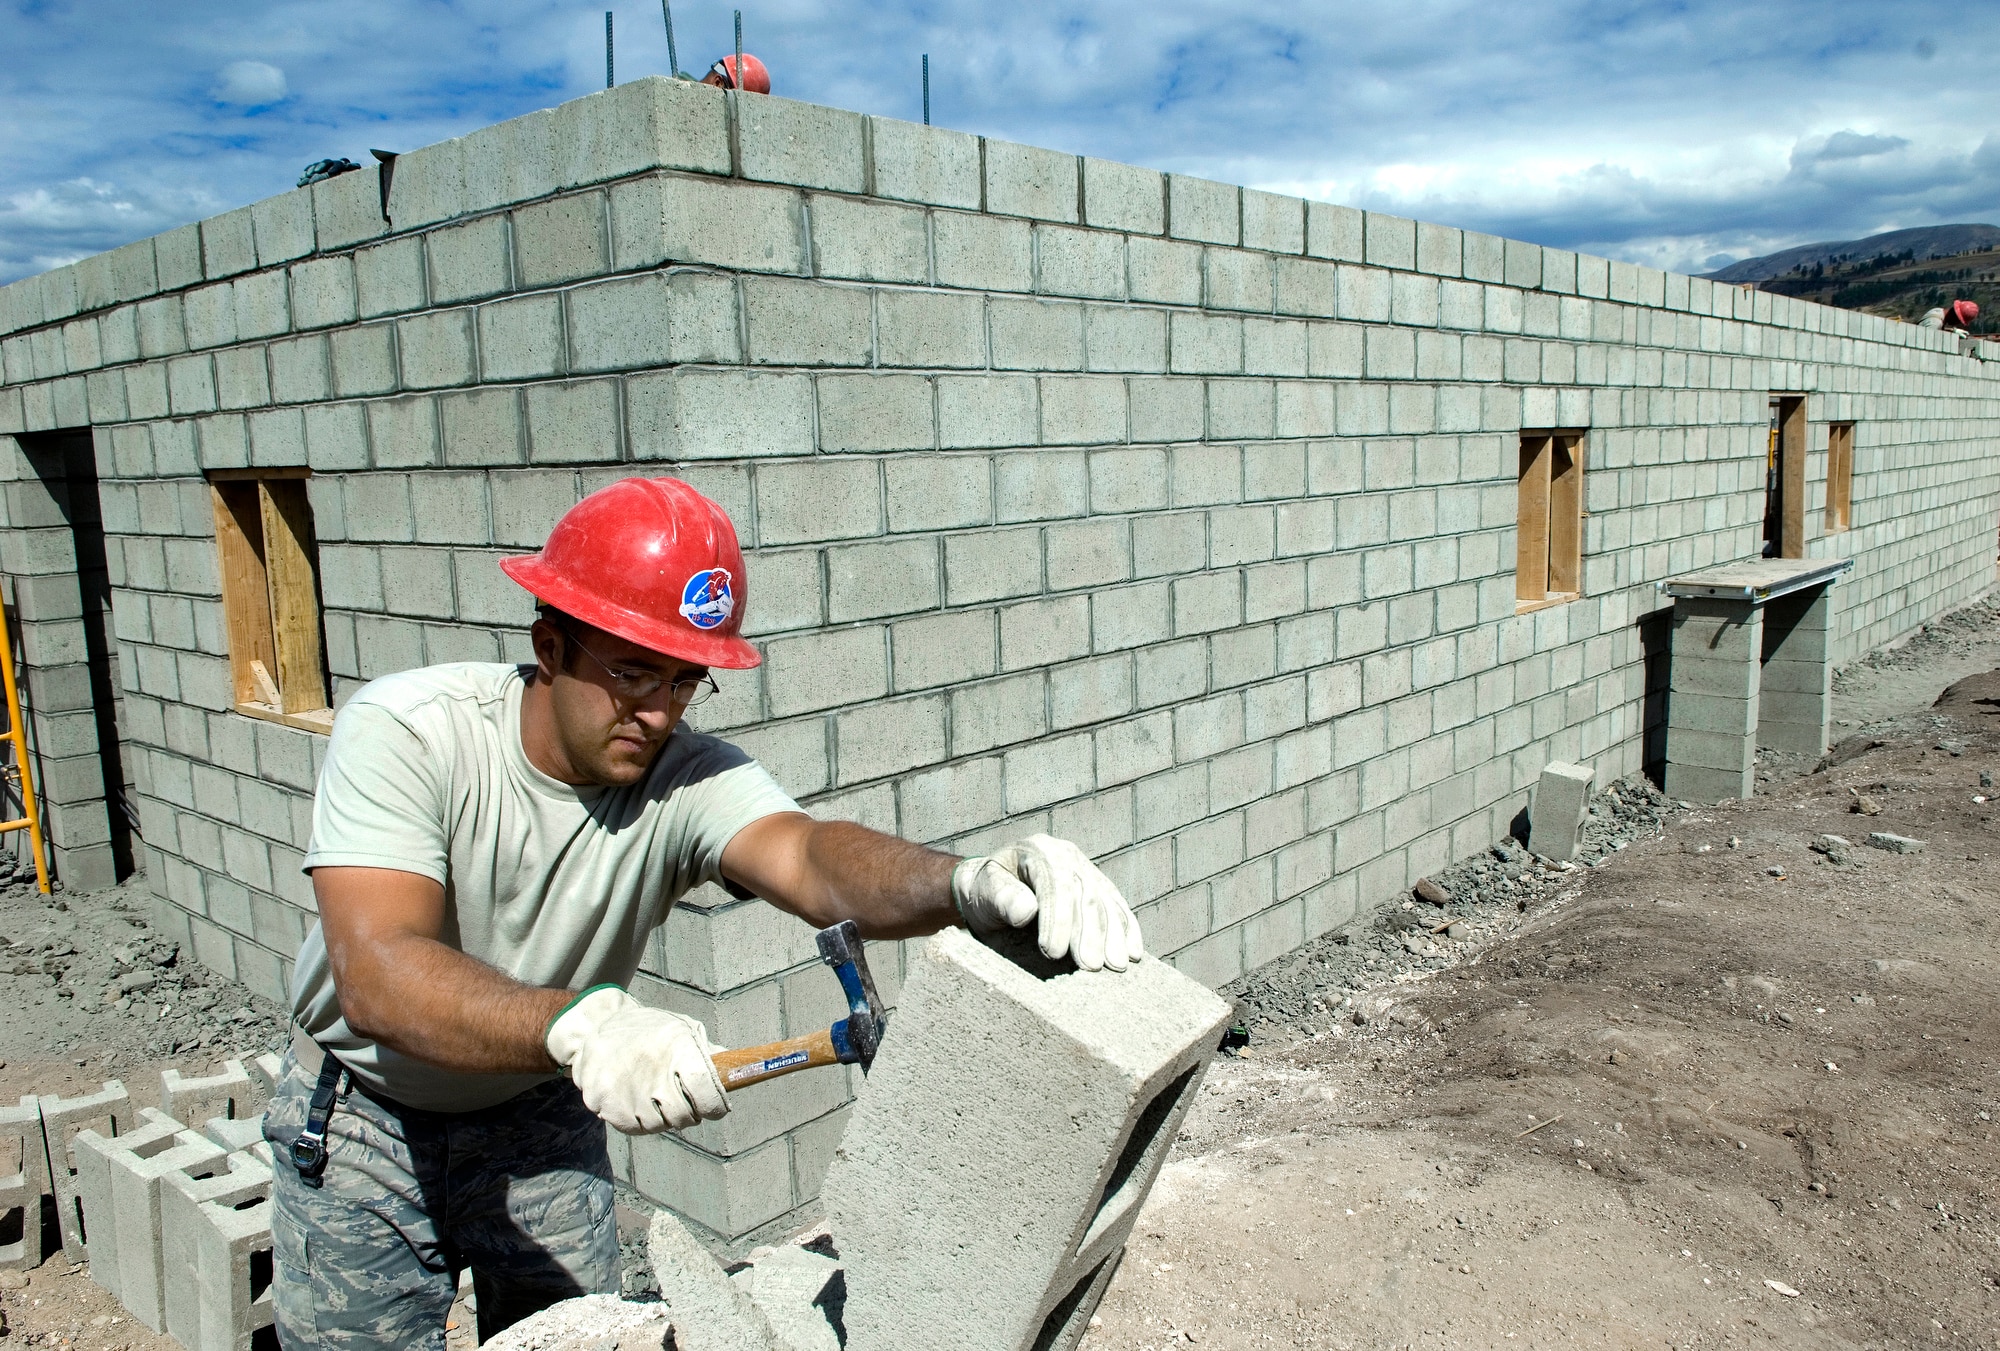 Tech. Sgt. Devan Chuvnoski prepares cinder blocks for the building of a medical clinic in Yanama, Peru, June 23 during New Horizons-Peru 2008, a U.S. and Peruvian partnered humanitarian mission set on providing relief to underprivileged Peruvians. Sergeant Chuvnoski is a civil engineer with the 820th RED HORSE Squadron at Nellis Air Force Base, Nev. (U.S. Air Force photo/Staff Sgt. Bennie J. Davis III)